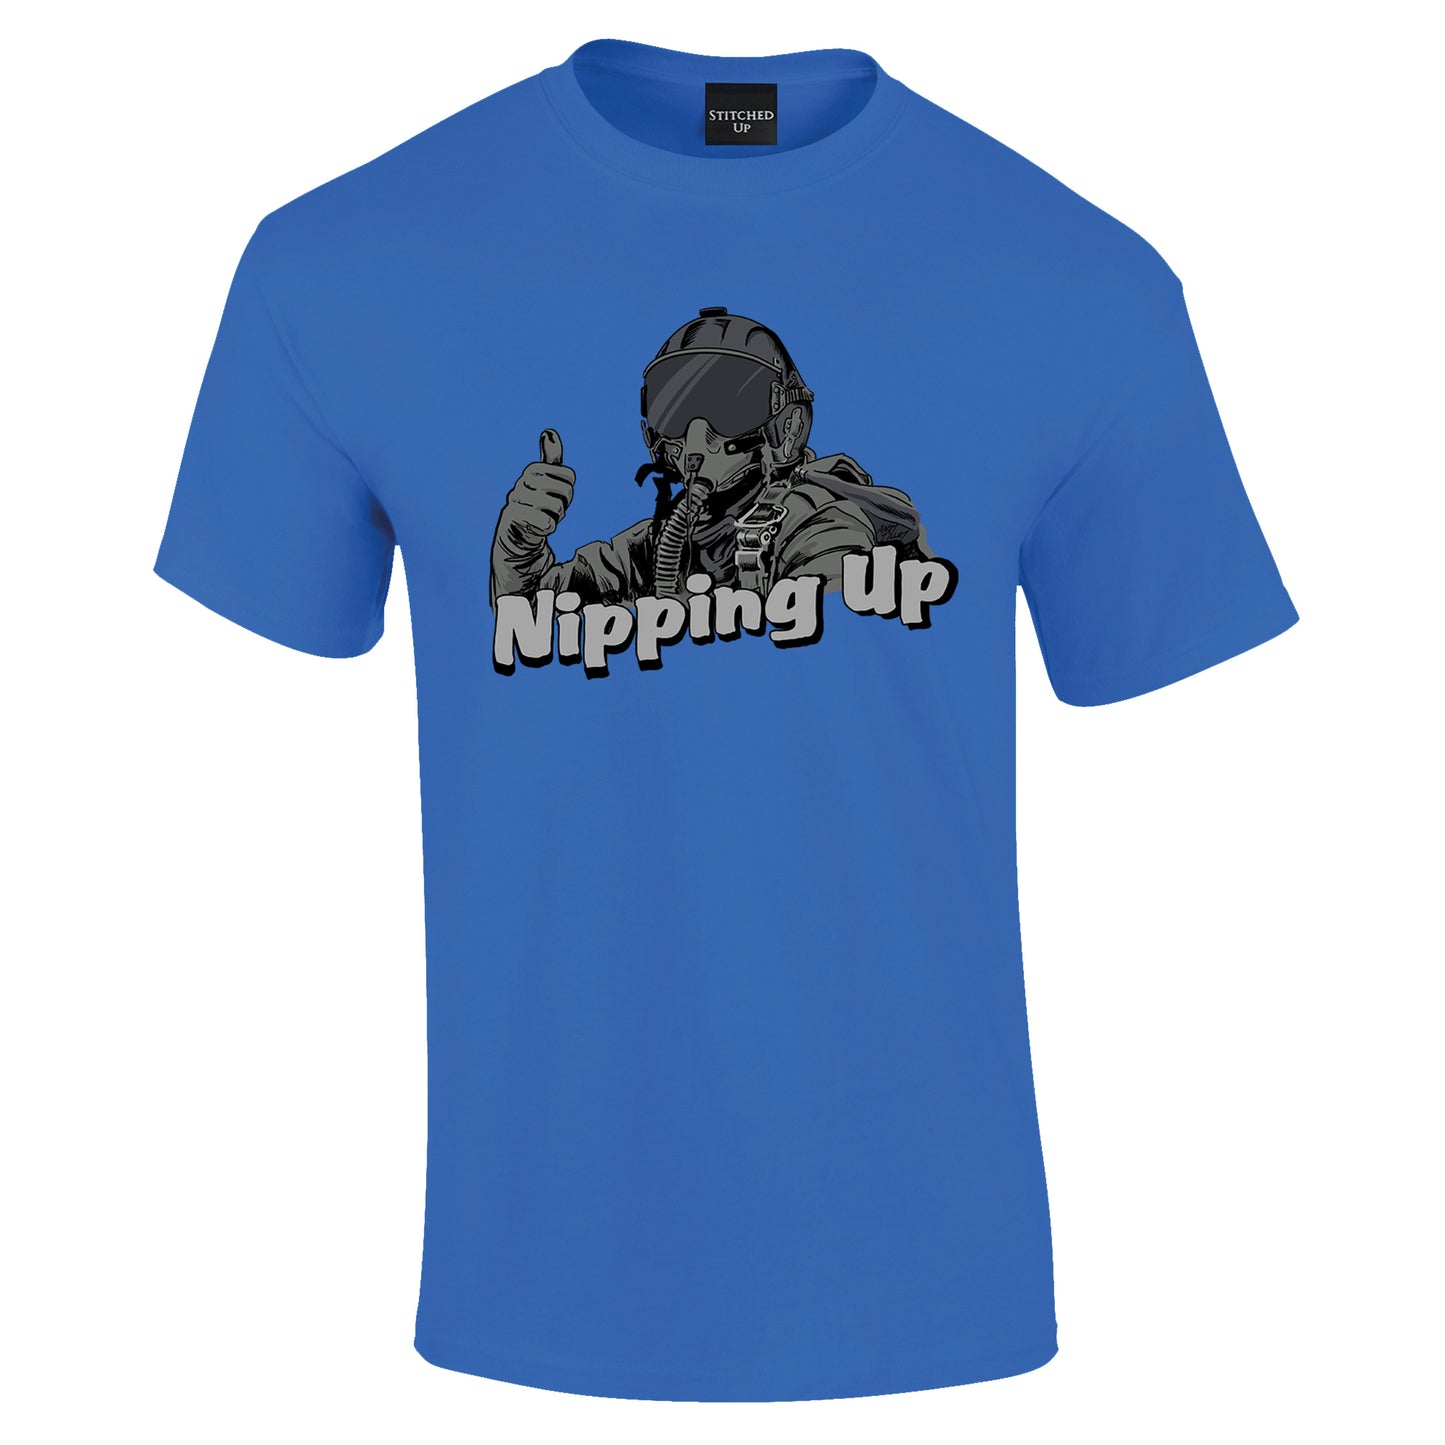 Nipping Up Fighter Pilot T-Shirt